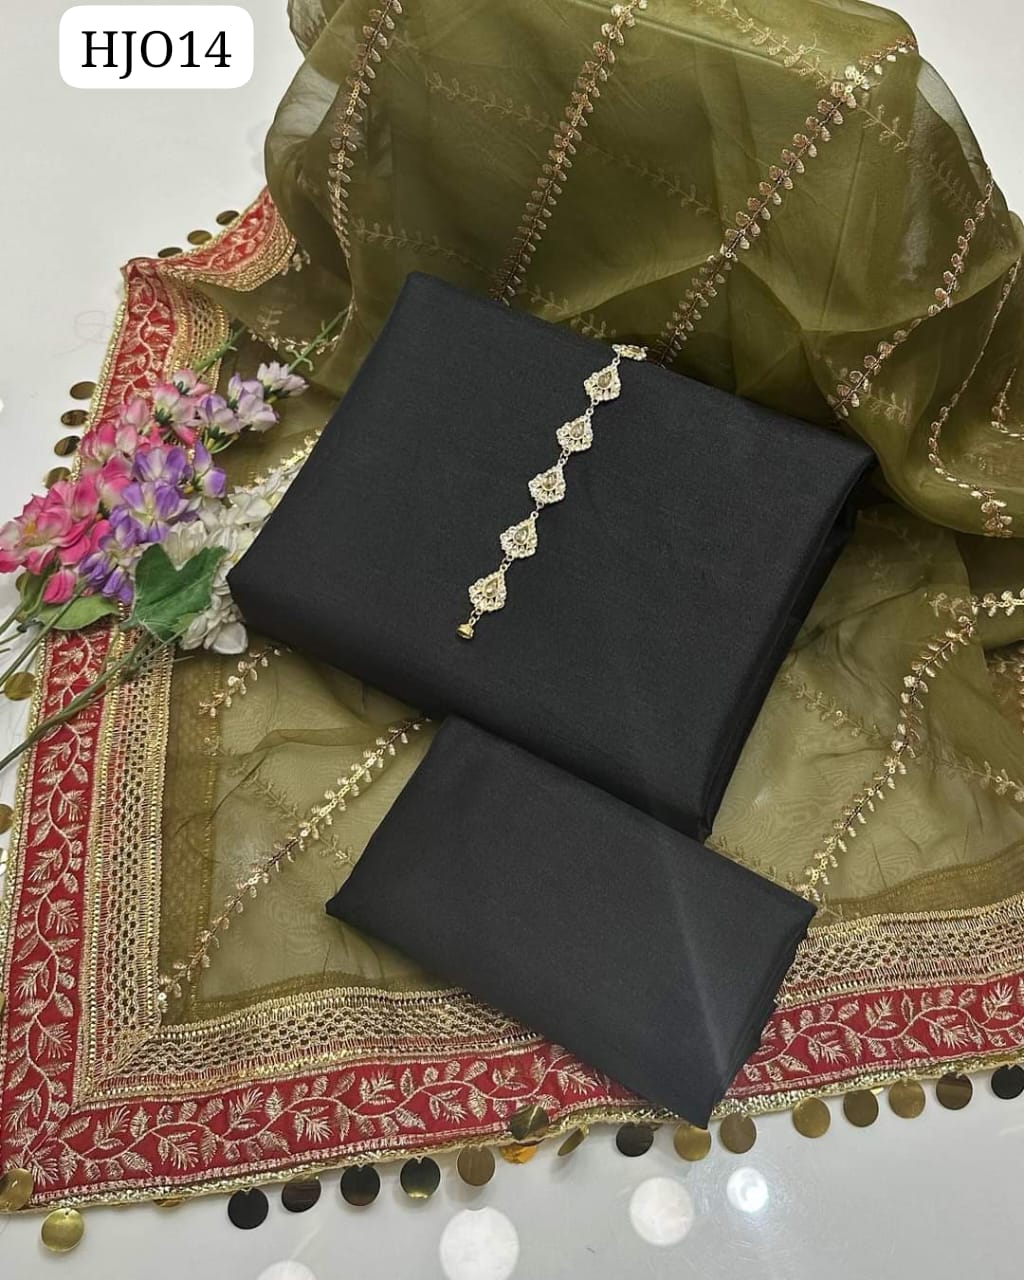 Kataan Silk Fabric Plain Shirt With Along Indian Orgnza Boder Dupatta And Kataan Silk Trouser With Neck Line And With Out Shose